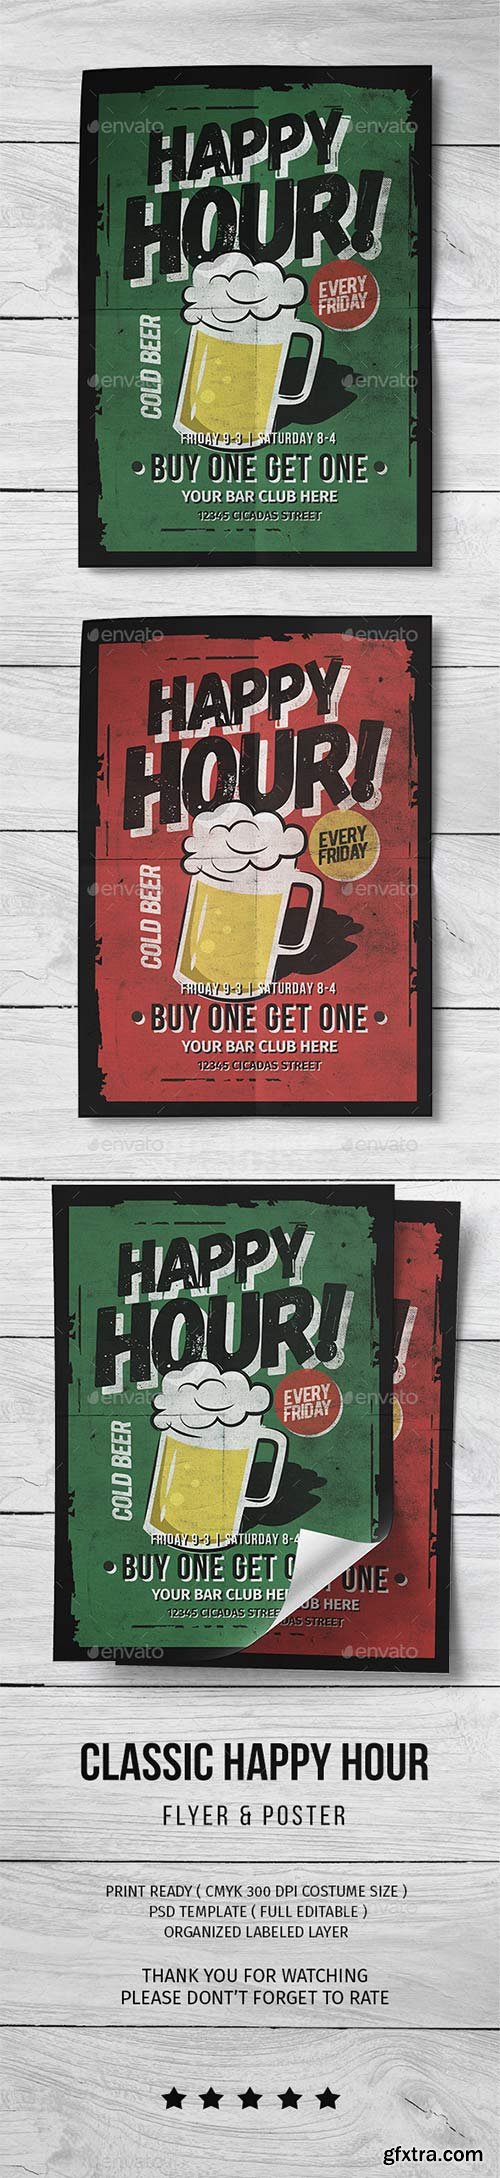 Graphicriver - Classic Happy Hour Flyer 20519819